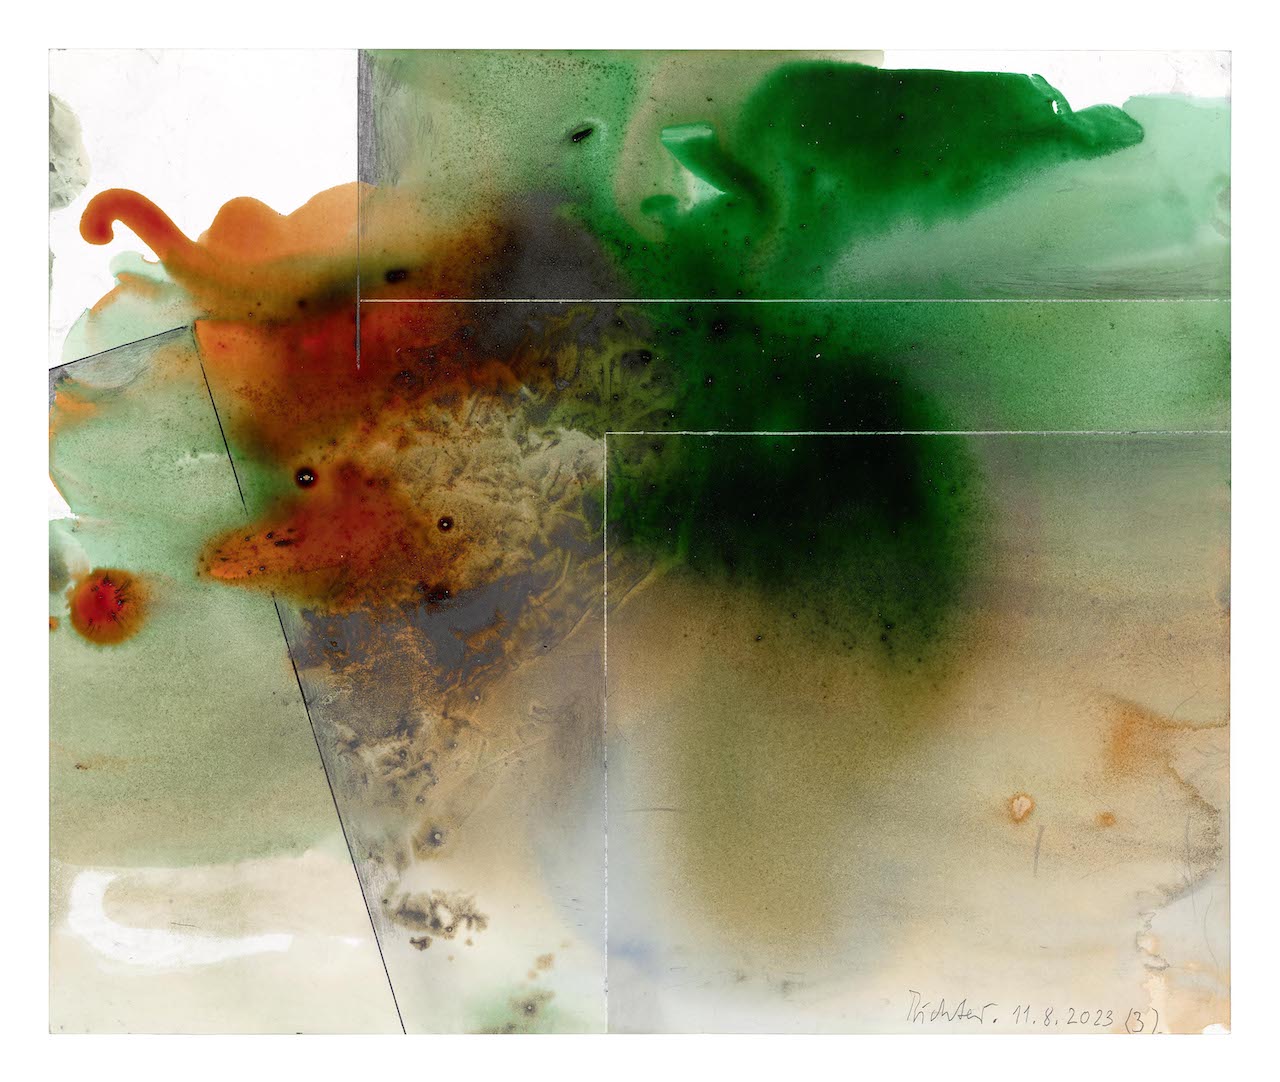 The Wick - Gerhard Richter
11.8.2023 (3), 2023
Colored ink and pencil on paper
© Gerhard Richter 2024 (25012024)